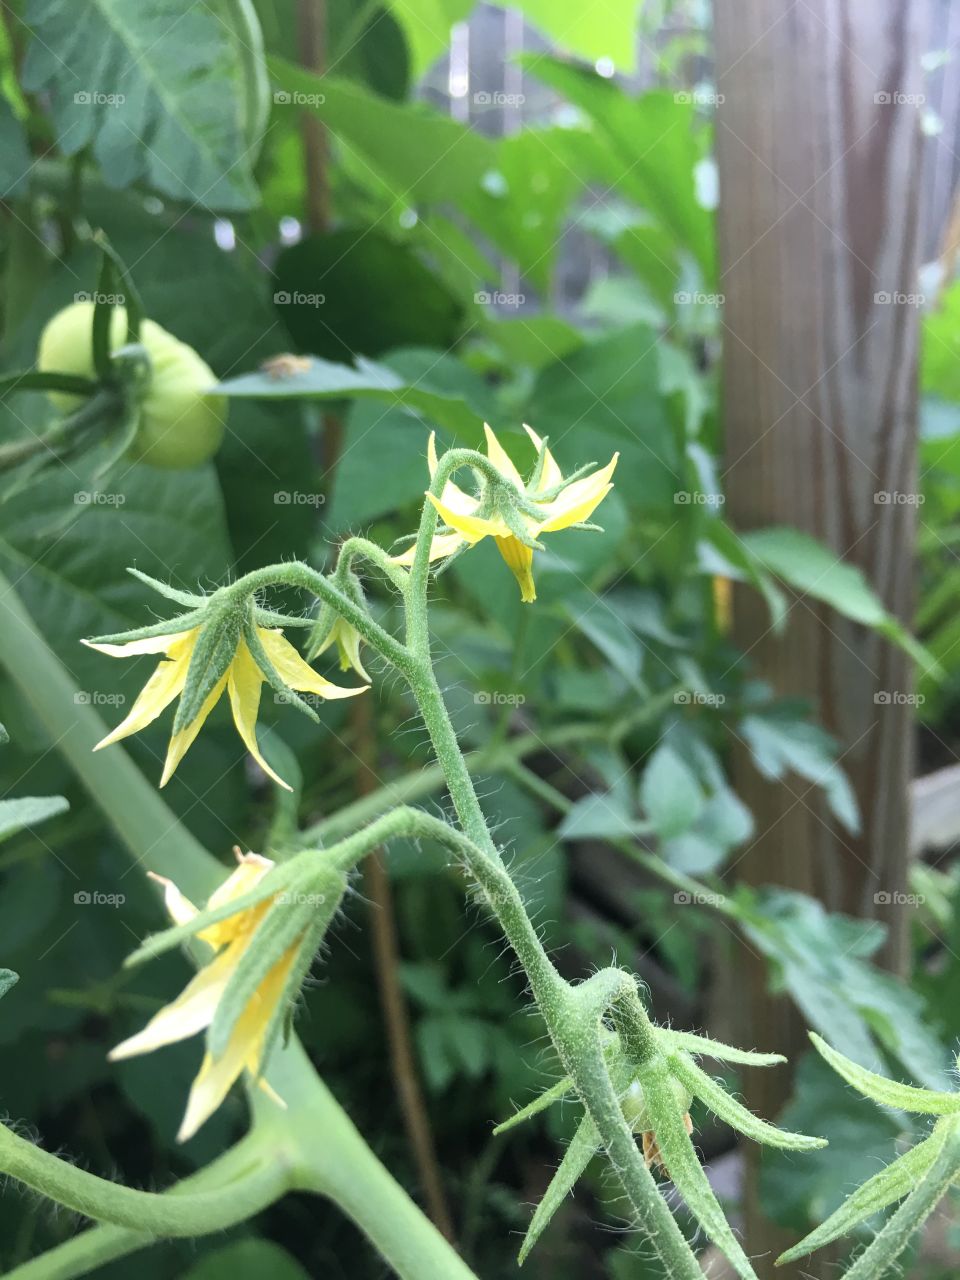 Spectacular tomato flower in full bloom with a green tomato in the background waiting to ripen. 